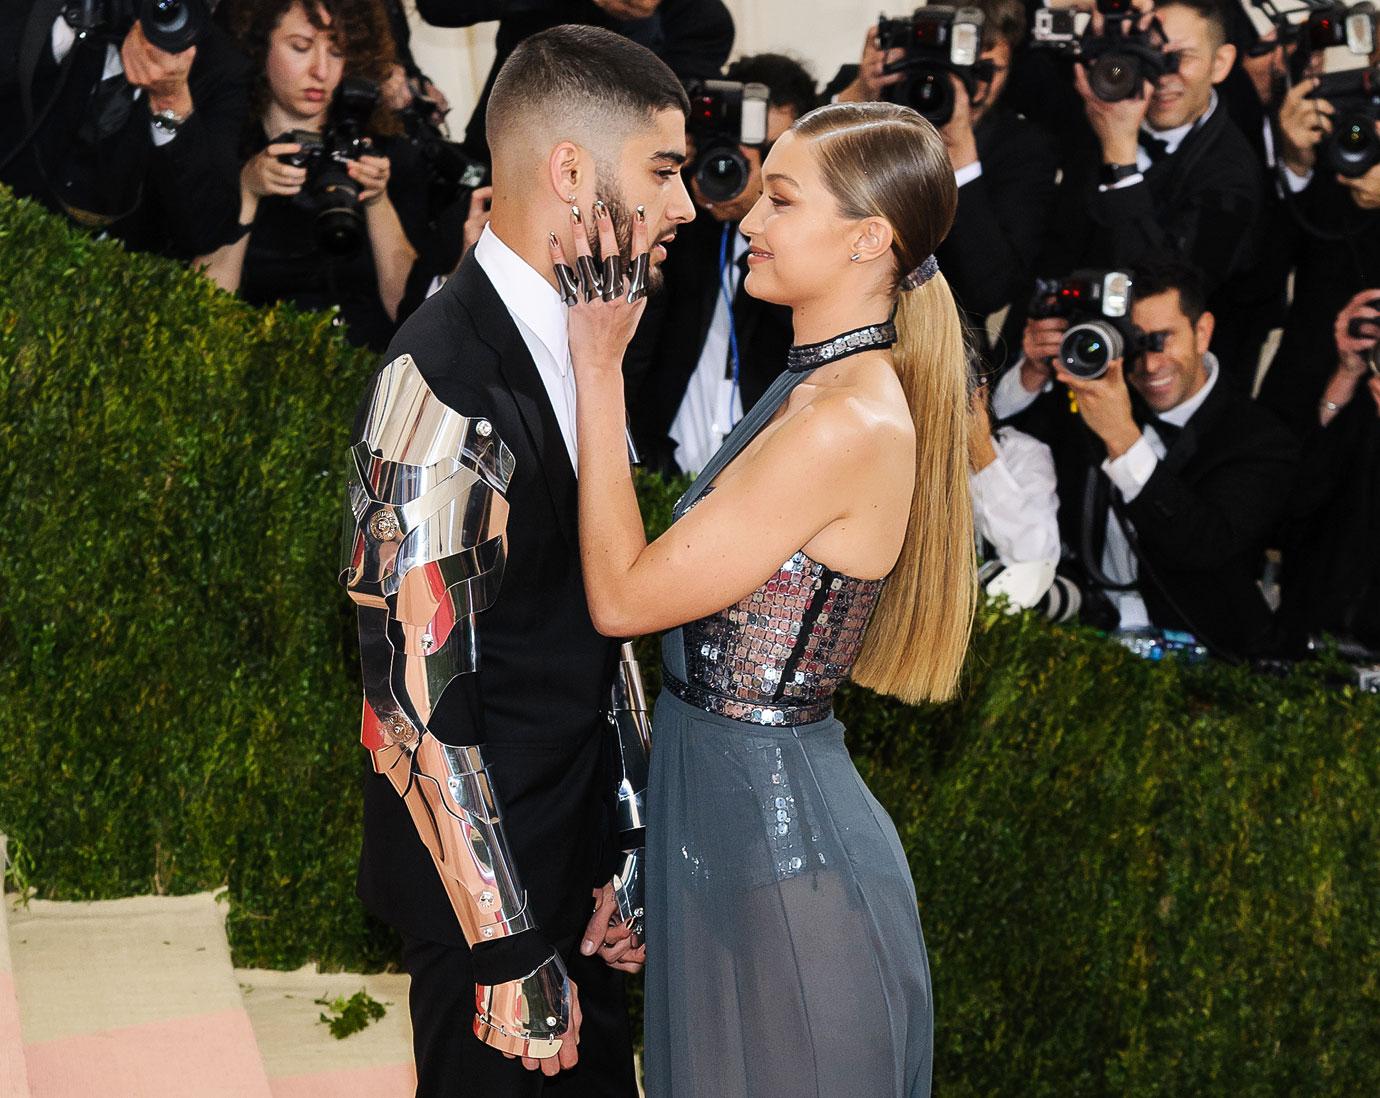 Zayn Malik Moves Out Of Home He Shared With Gigi Hadid After Split Finds Into His Own Pad Nearby 